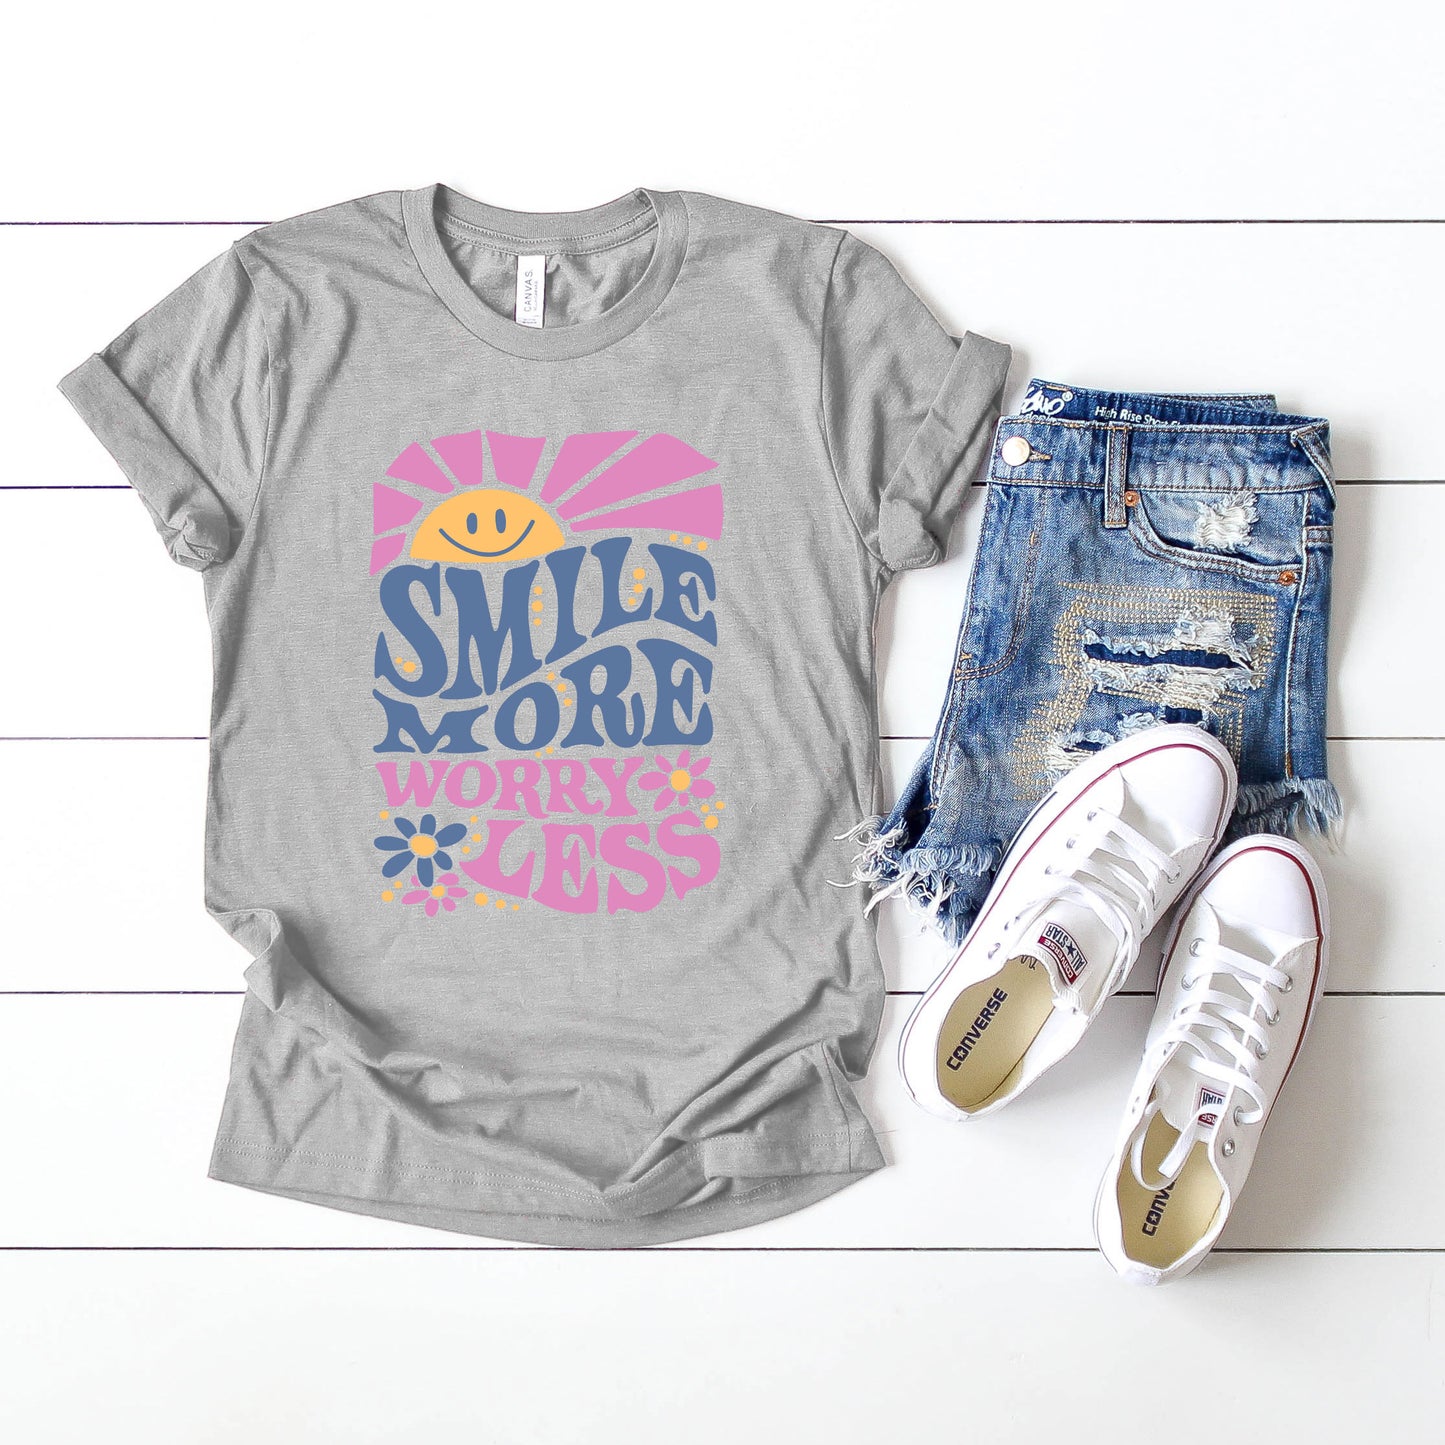 Smile More Worry Less Sunshine | Short Sleeve Graphic Tee